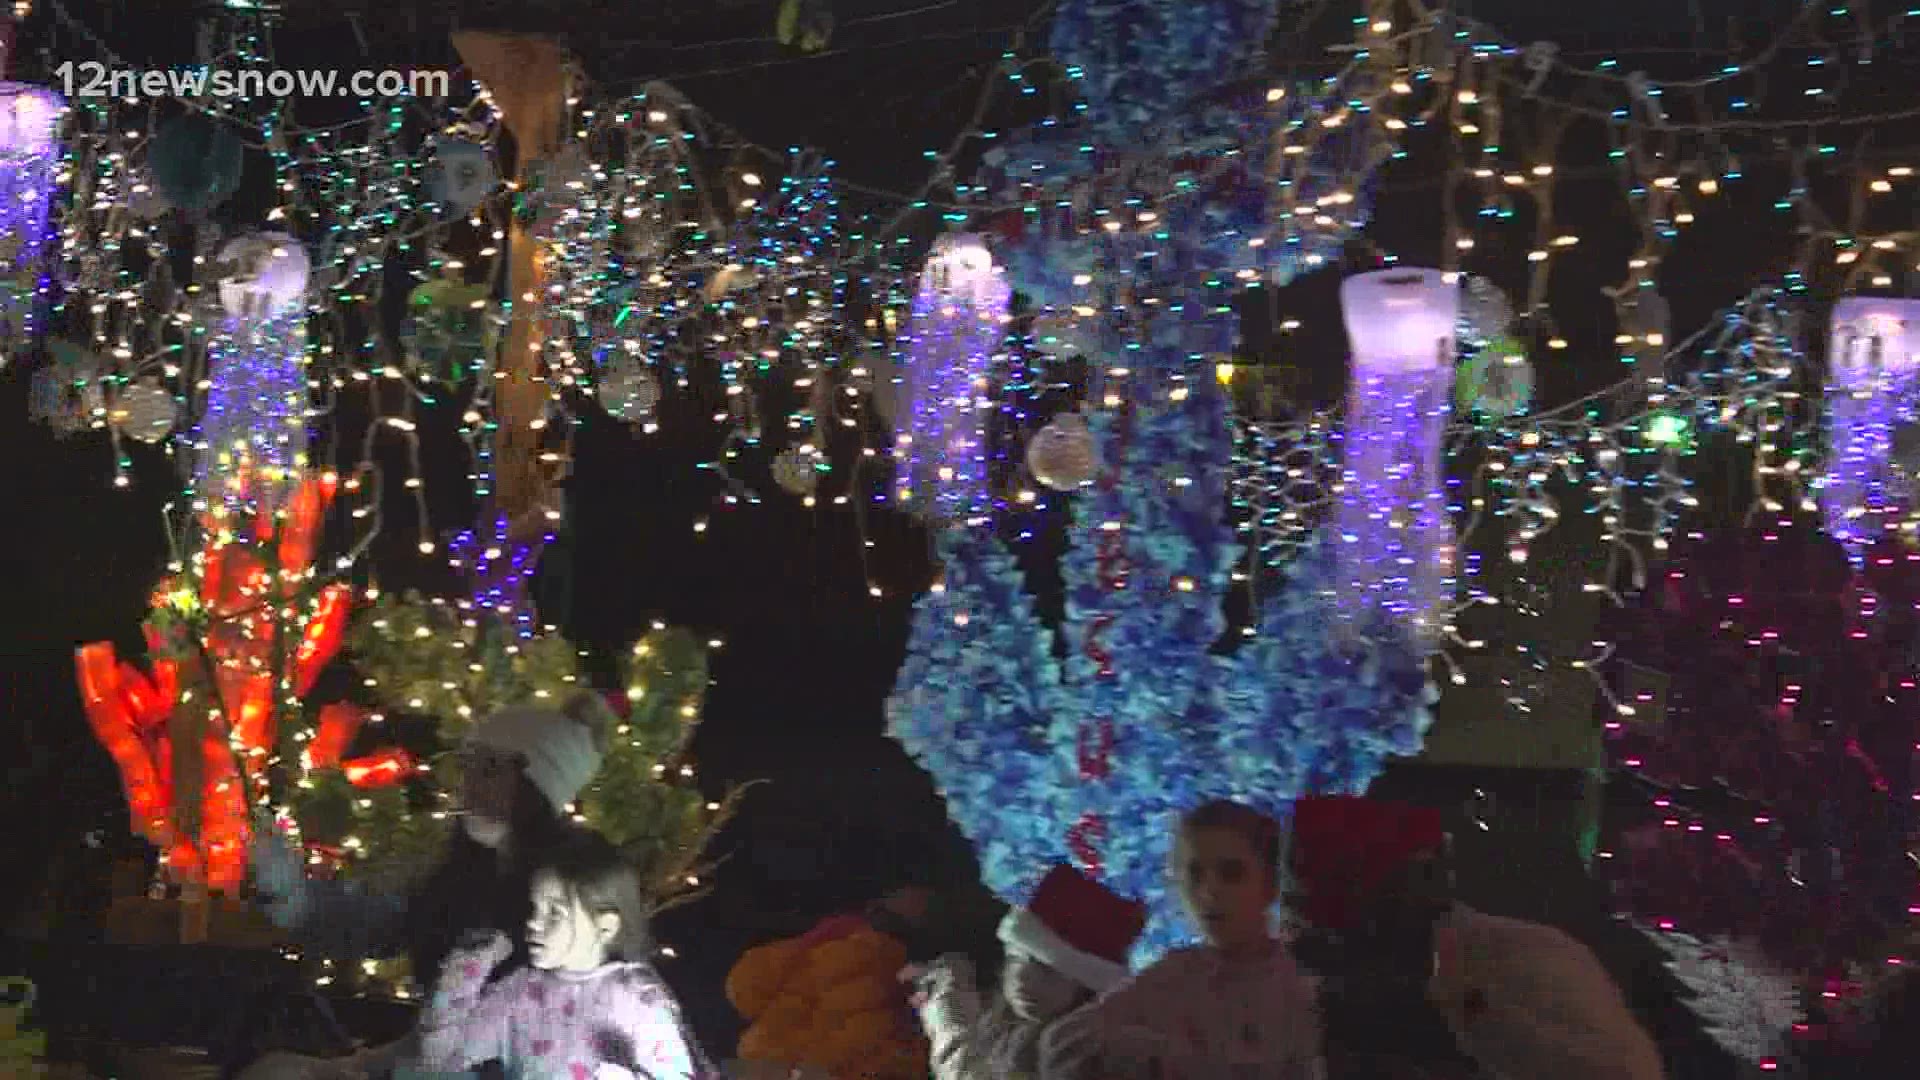 People in Silsbee packed the streets for the 2020 Christmas lighted parade.